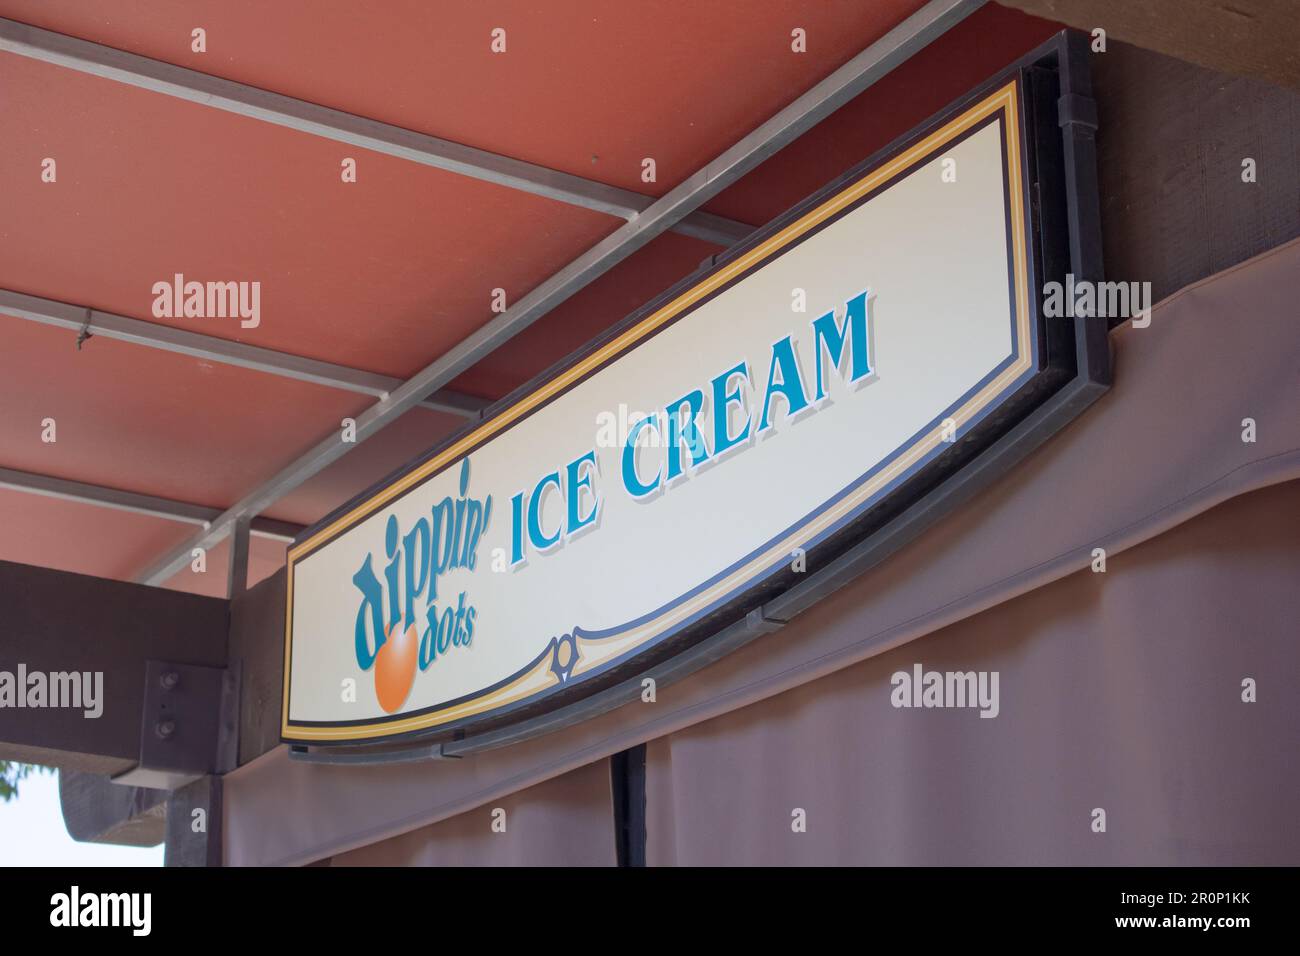 https://c8.alamy.com/comp/2R0P1KK/san-diego-california-united-states-09-23-2021-a-view-of-a-sign-selling-dippin-dots-ice-cream-food-products-2R0P1KK.jpg